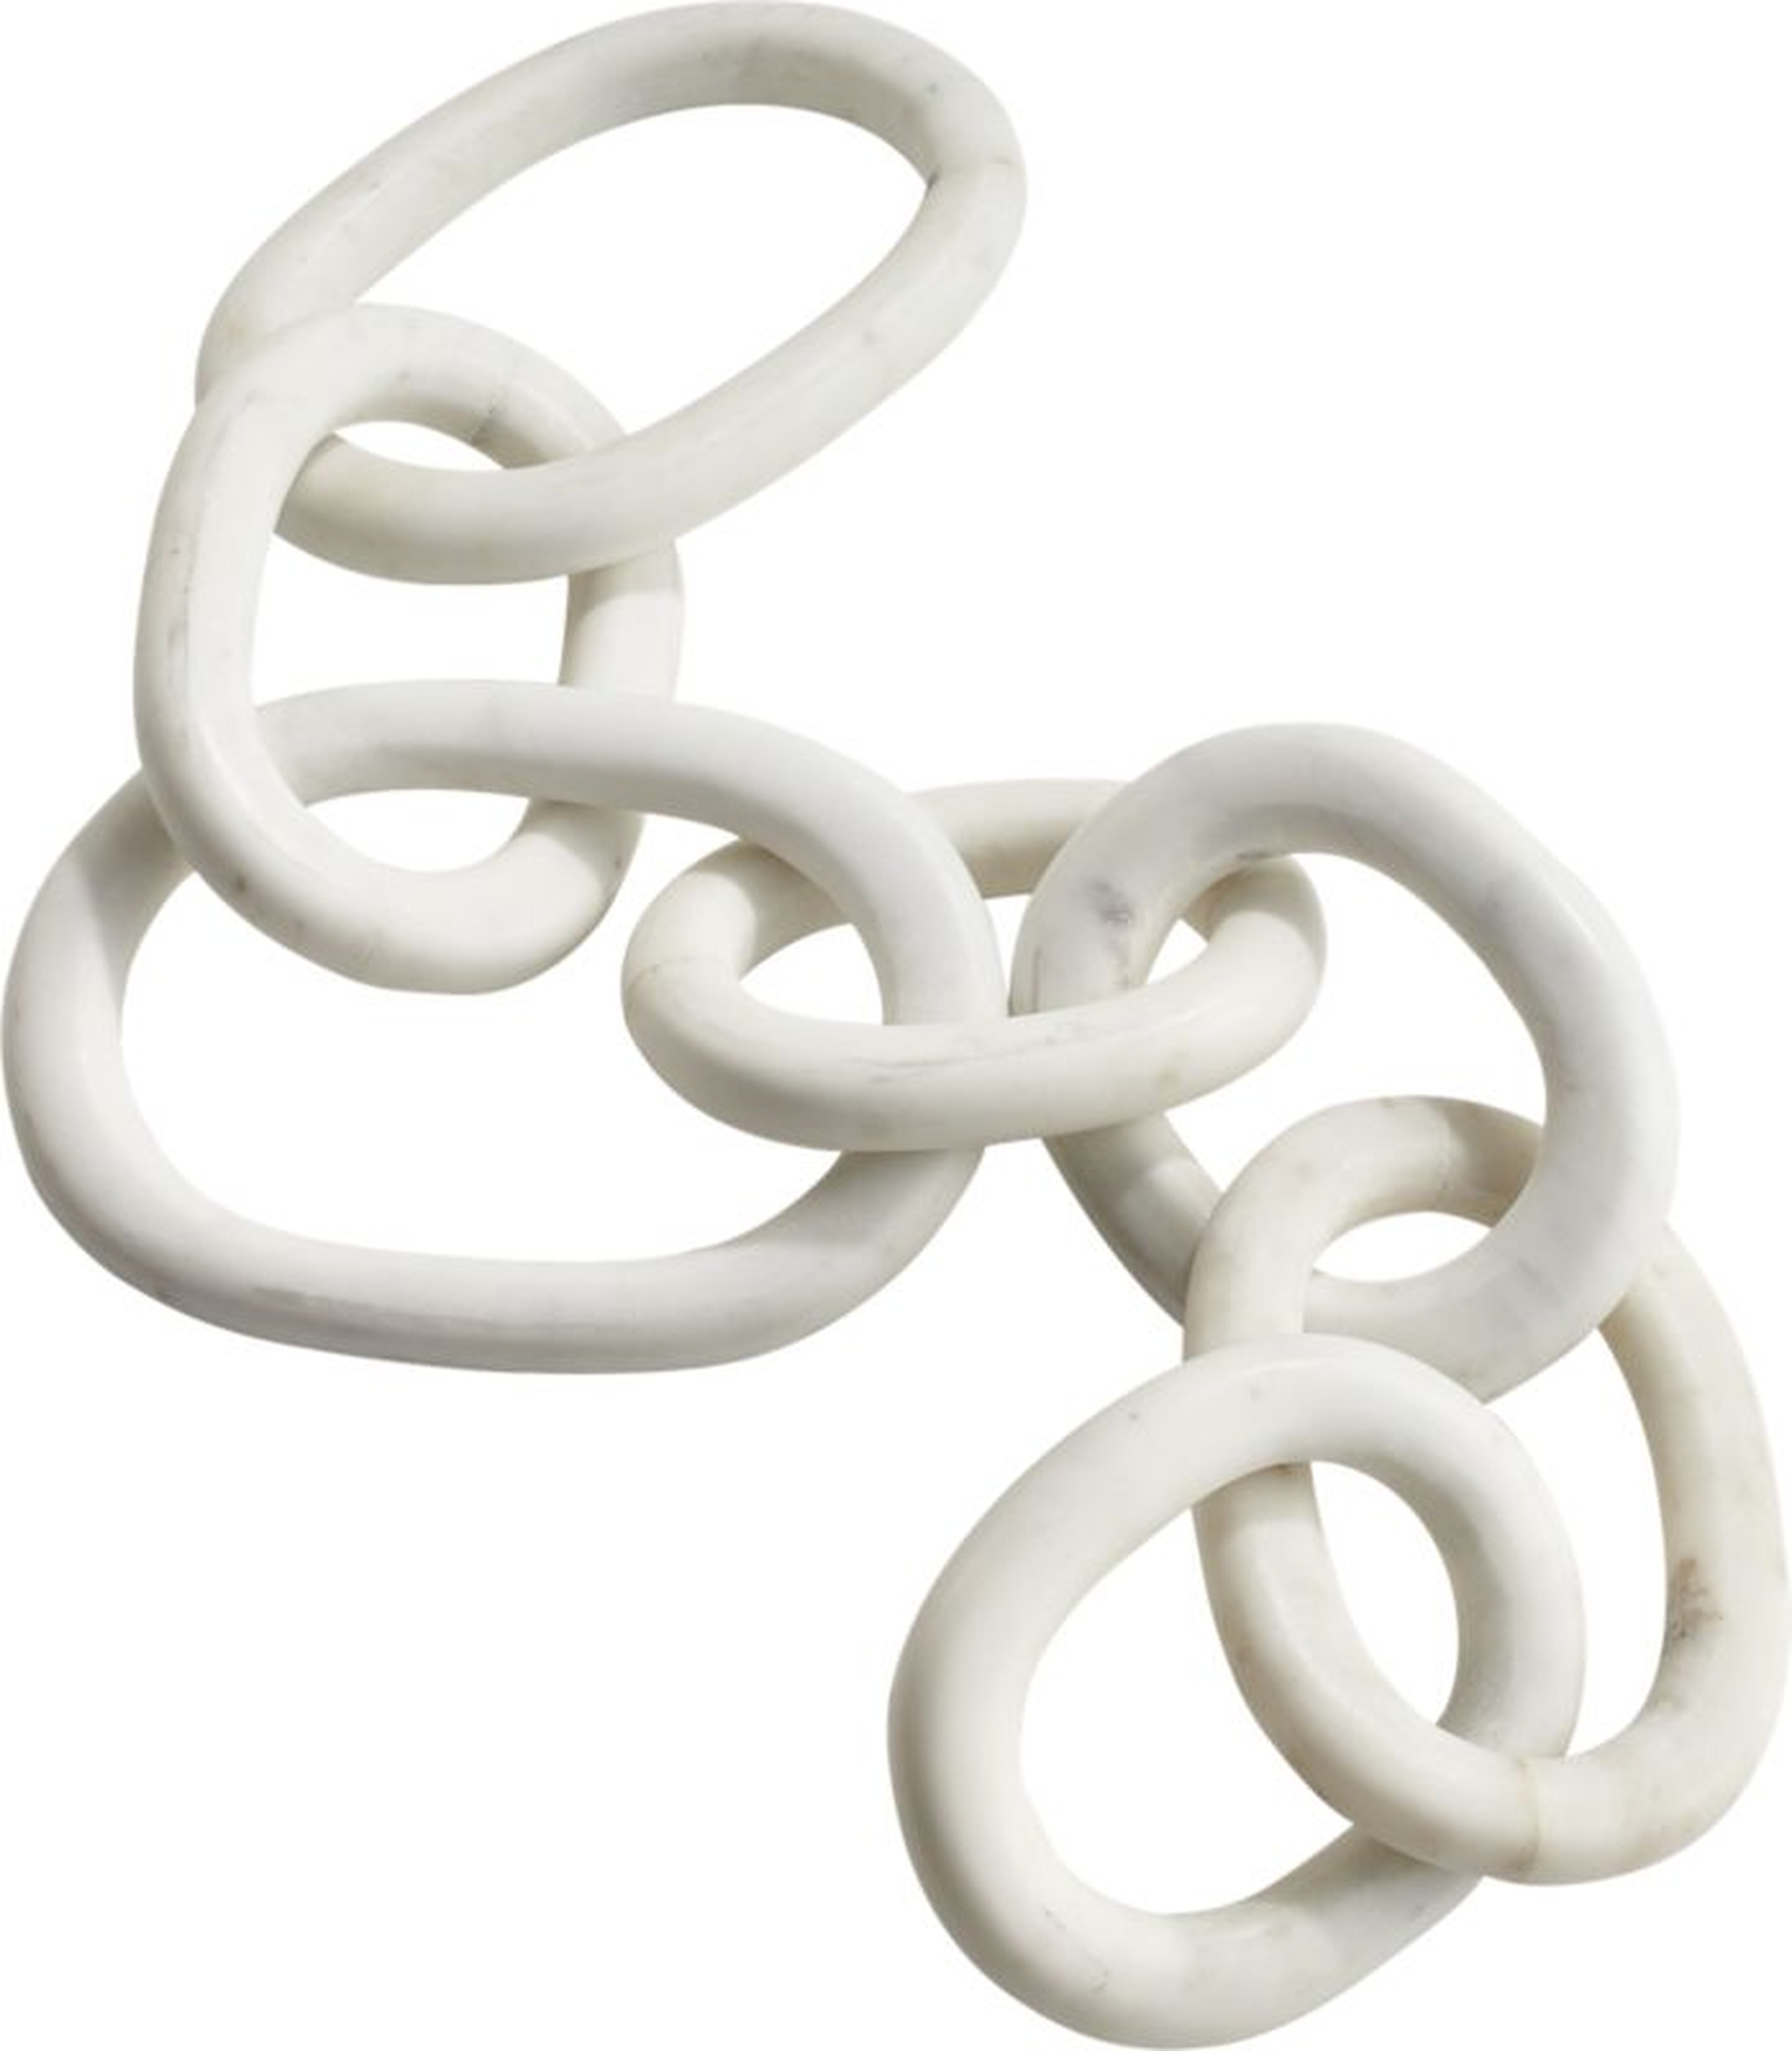 Links Marble Chain - CB2